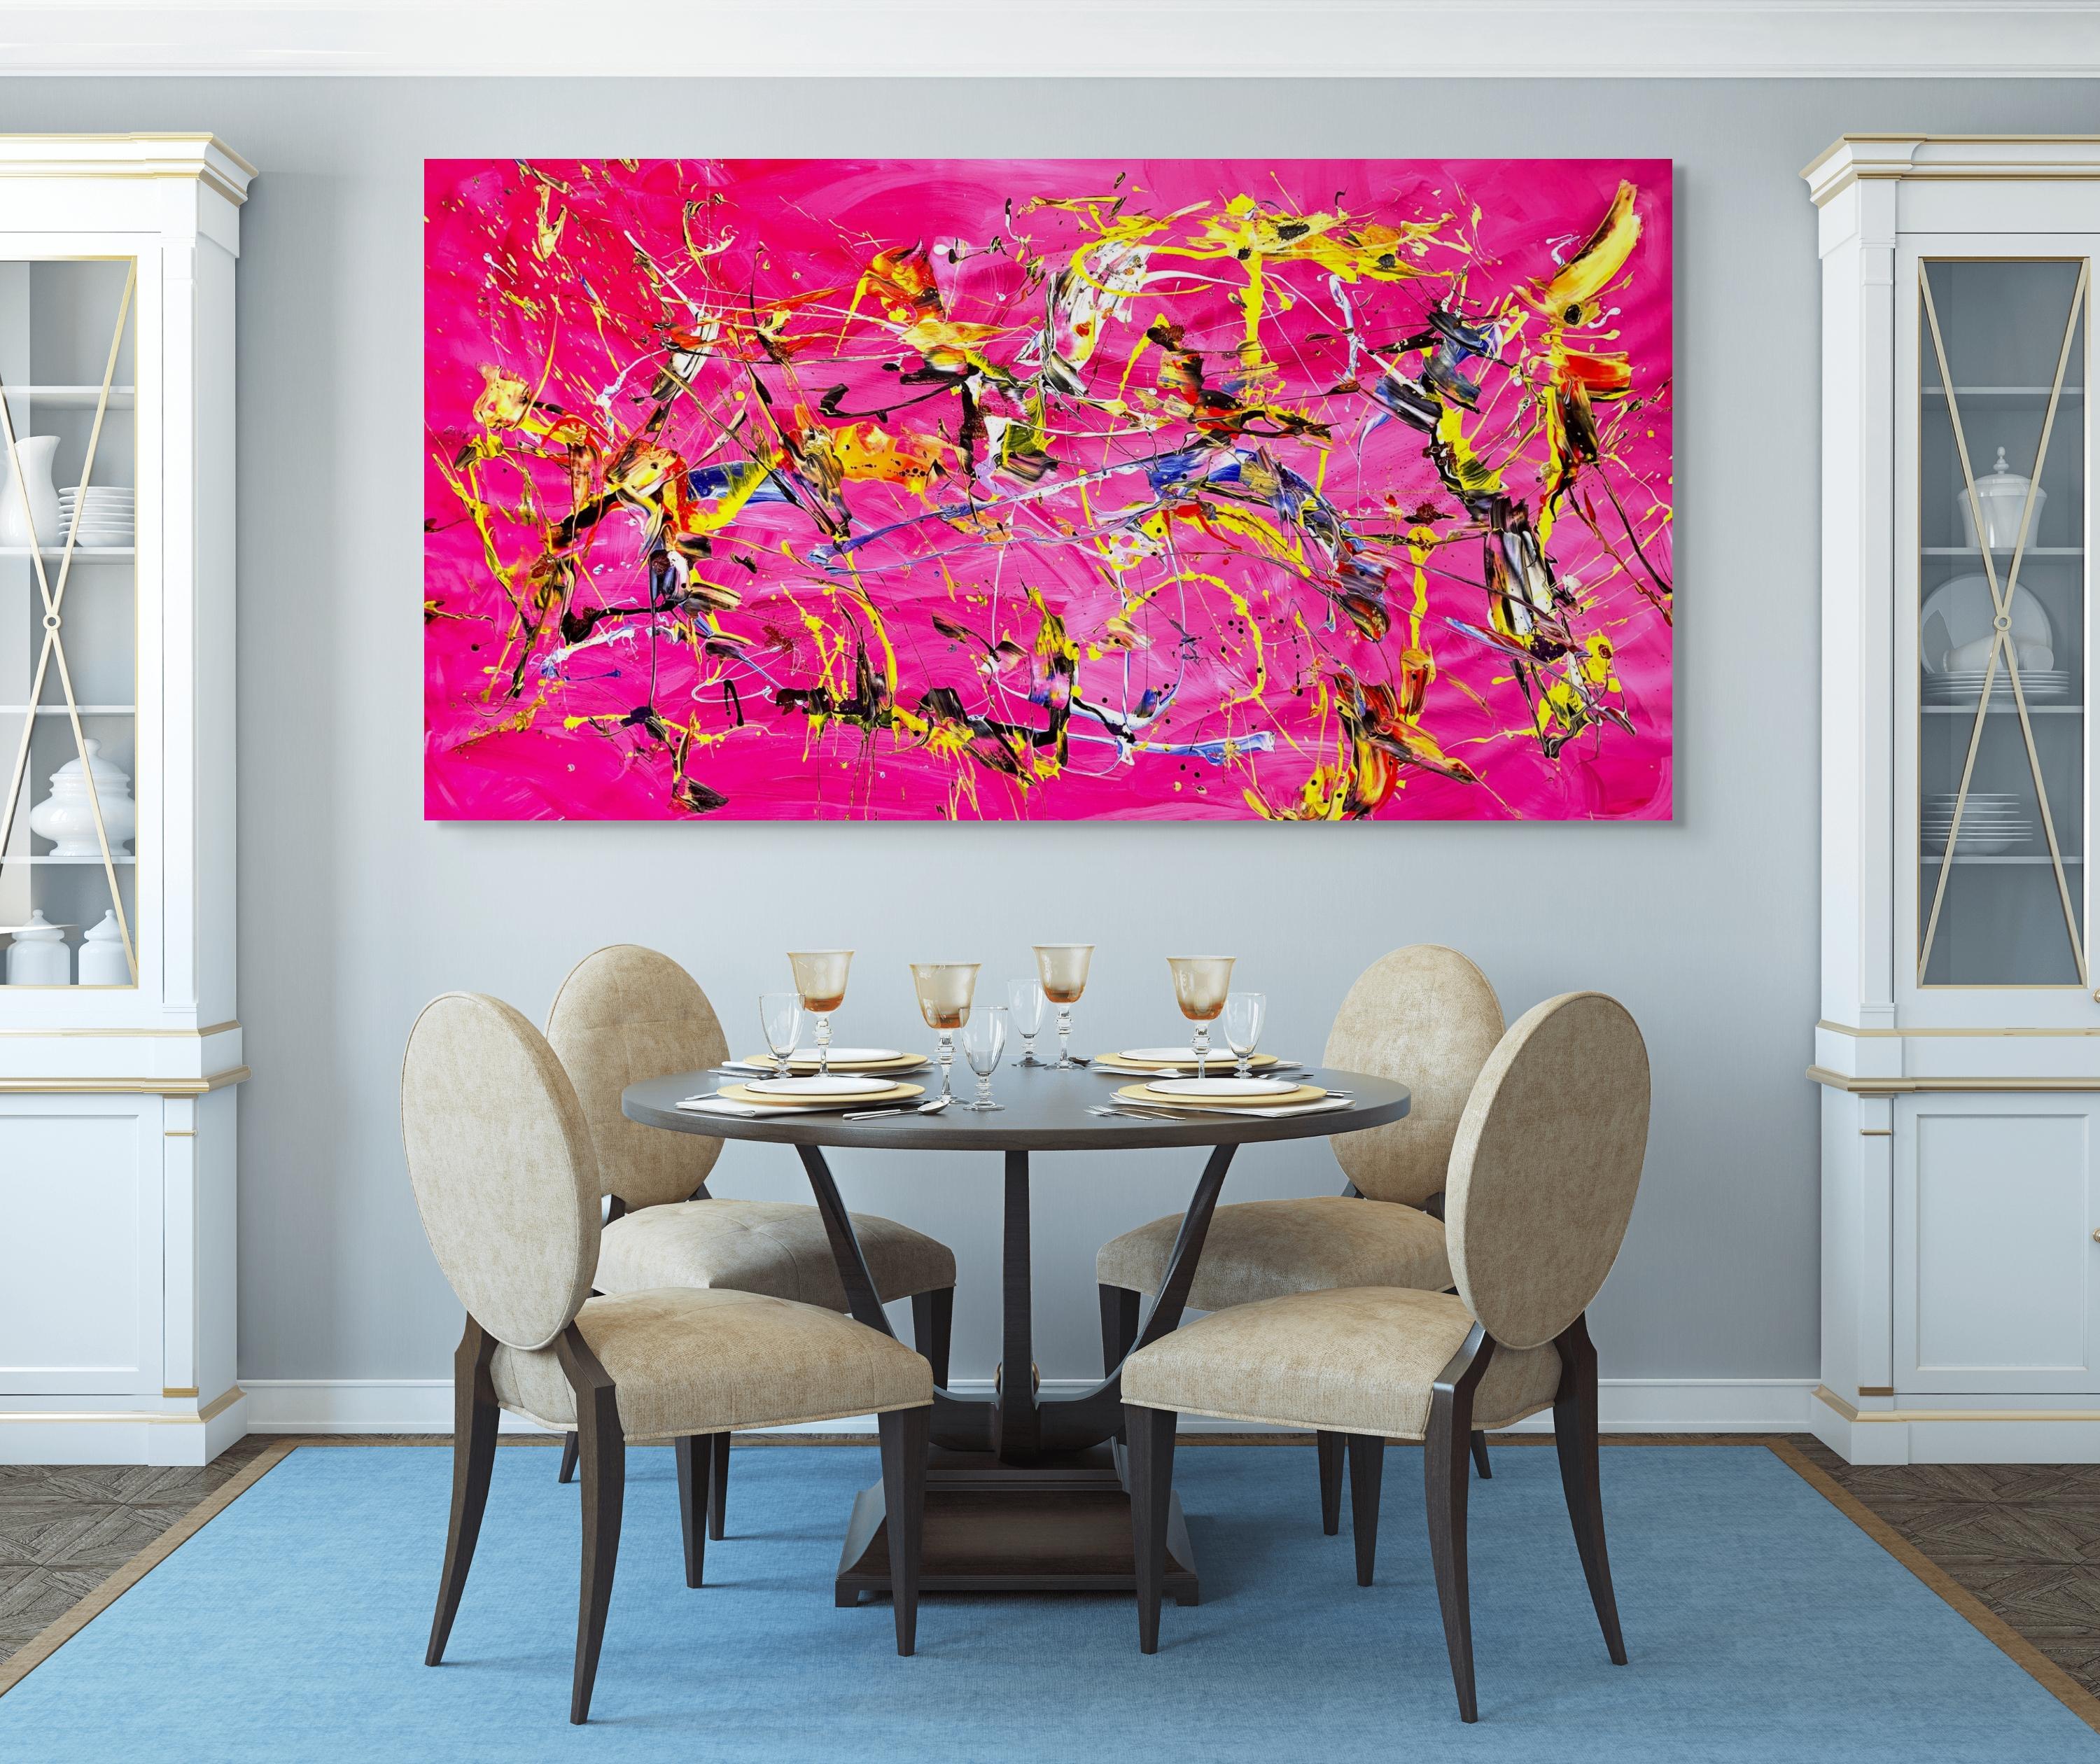 Deep Sea Creatures - Warm Bathing - Abstract Expressionist Painting by Estelle Asmodelle